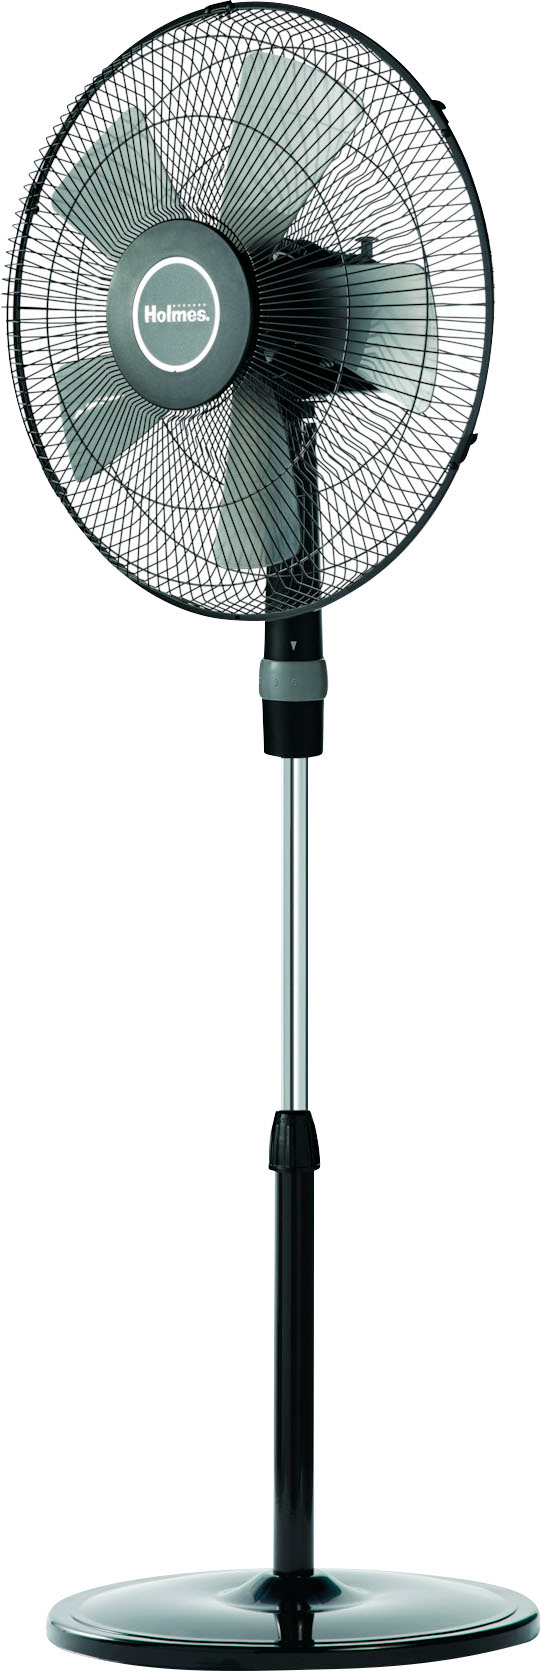 Angle View: Holmes - 16 in. Oscillating Stand Fan - Black